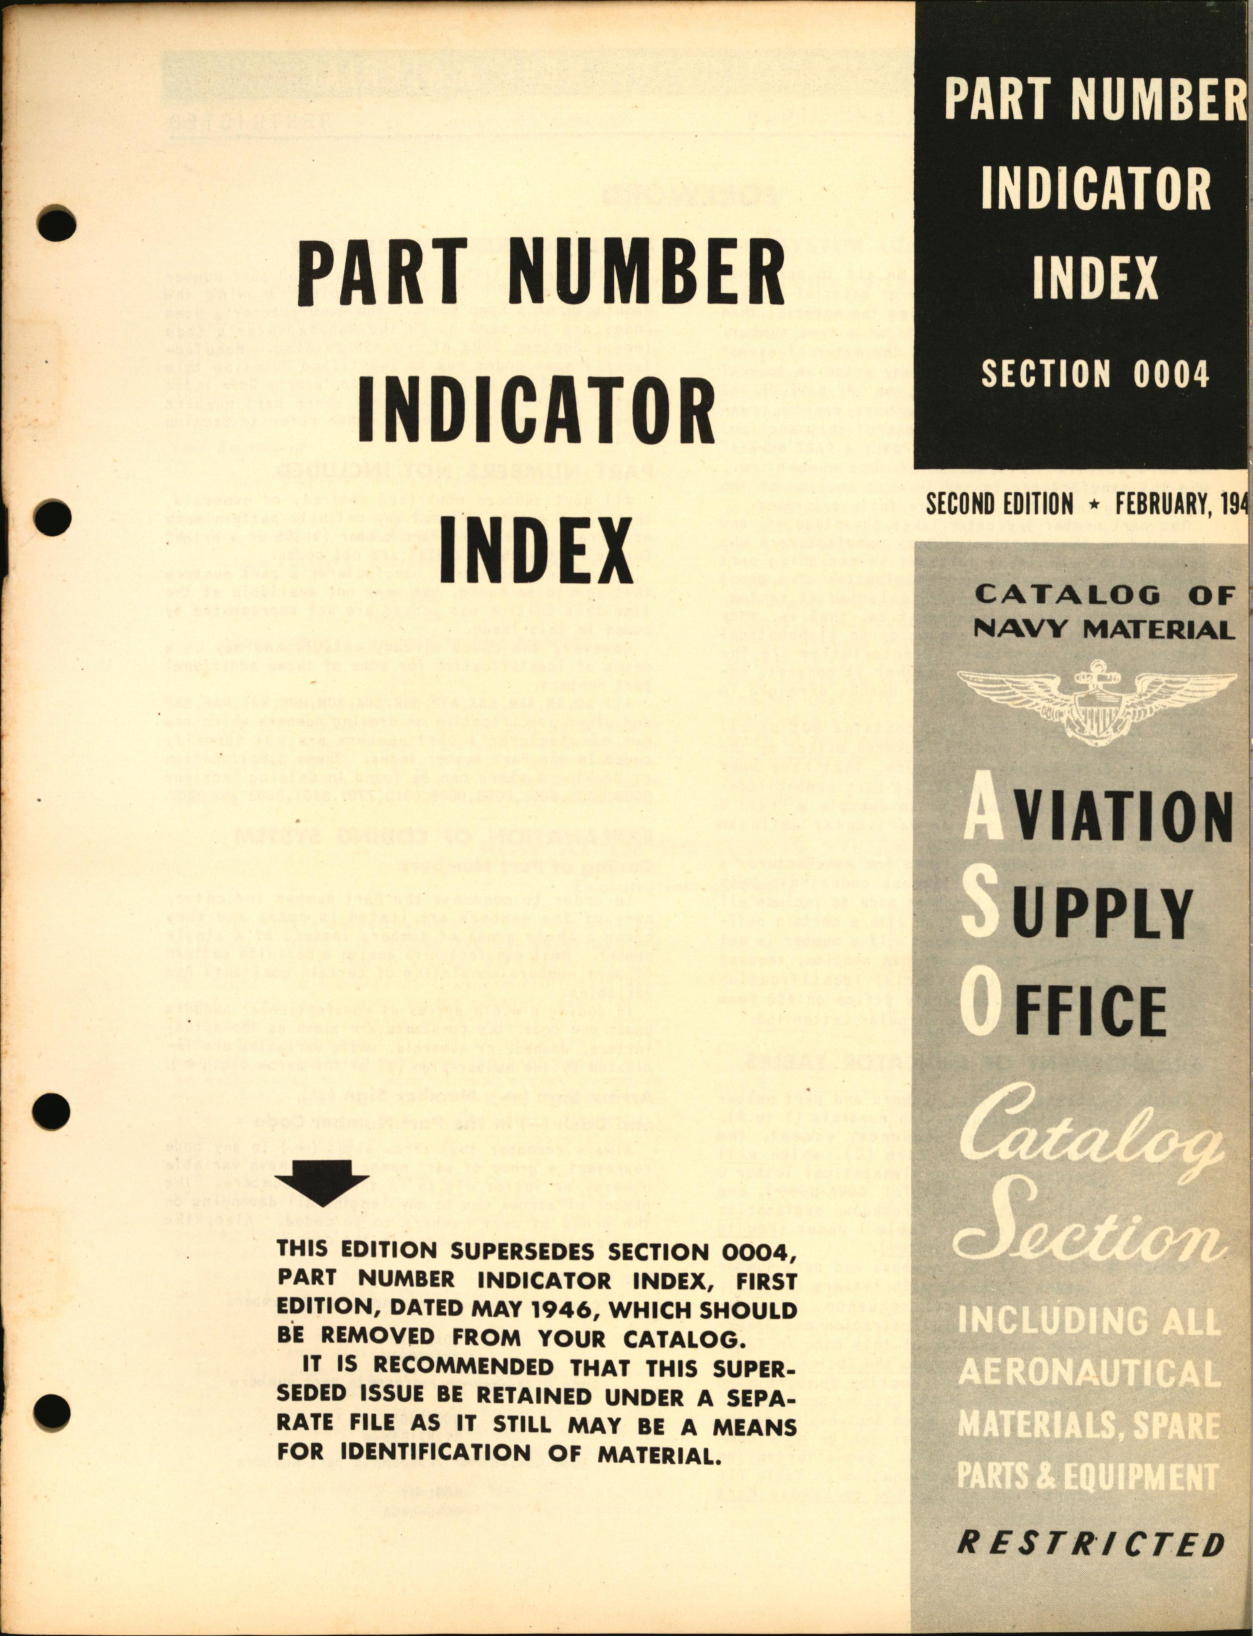 Sample page 1 from AirCorps Library document: Part Number Indicator Index 